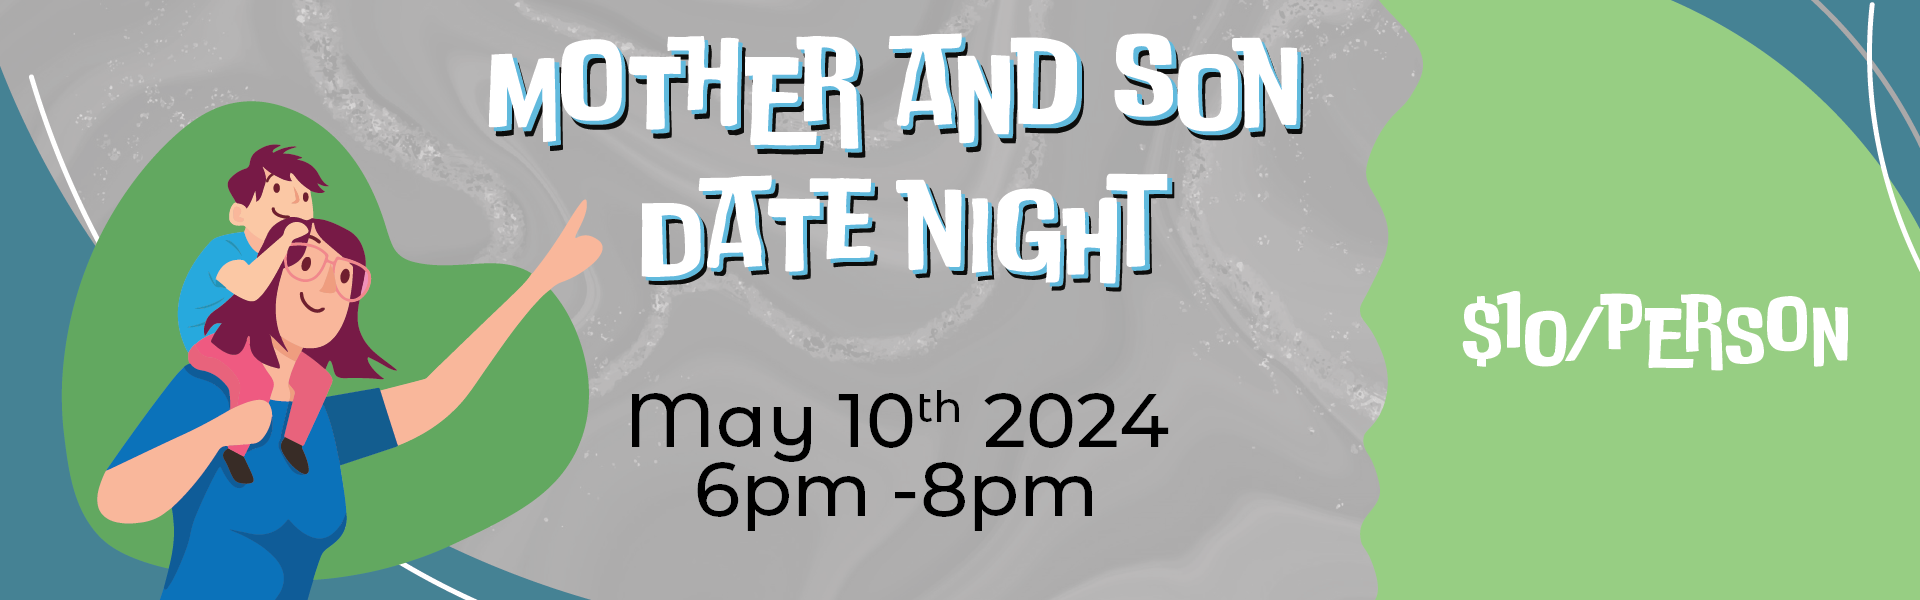 mother and son date night may 10th 2024